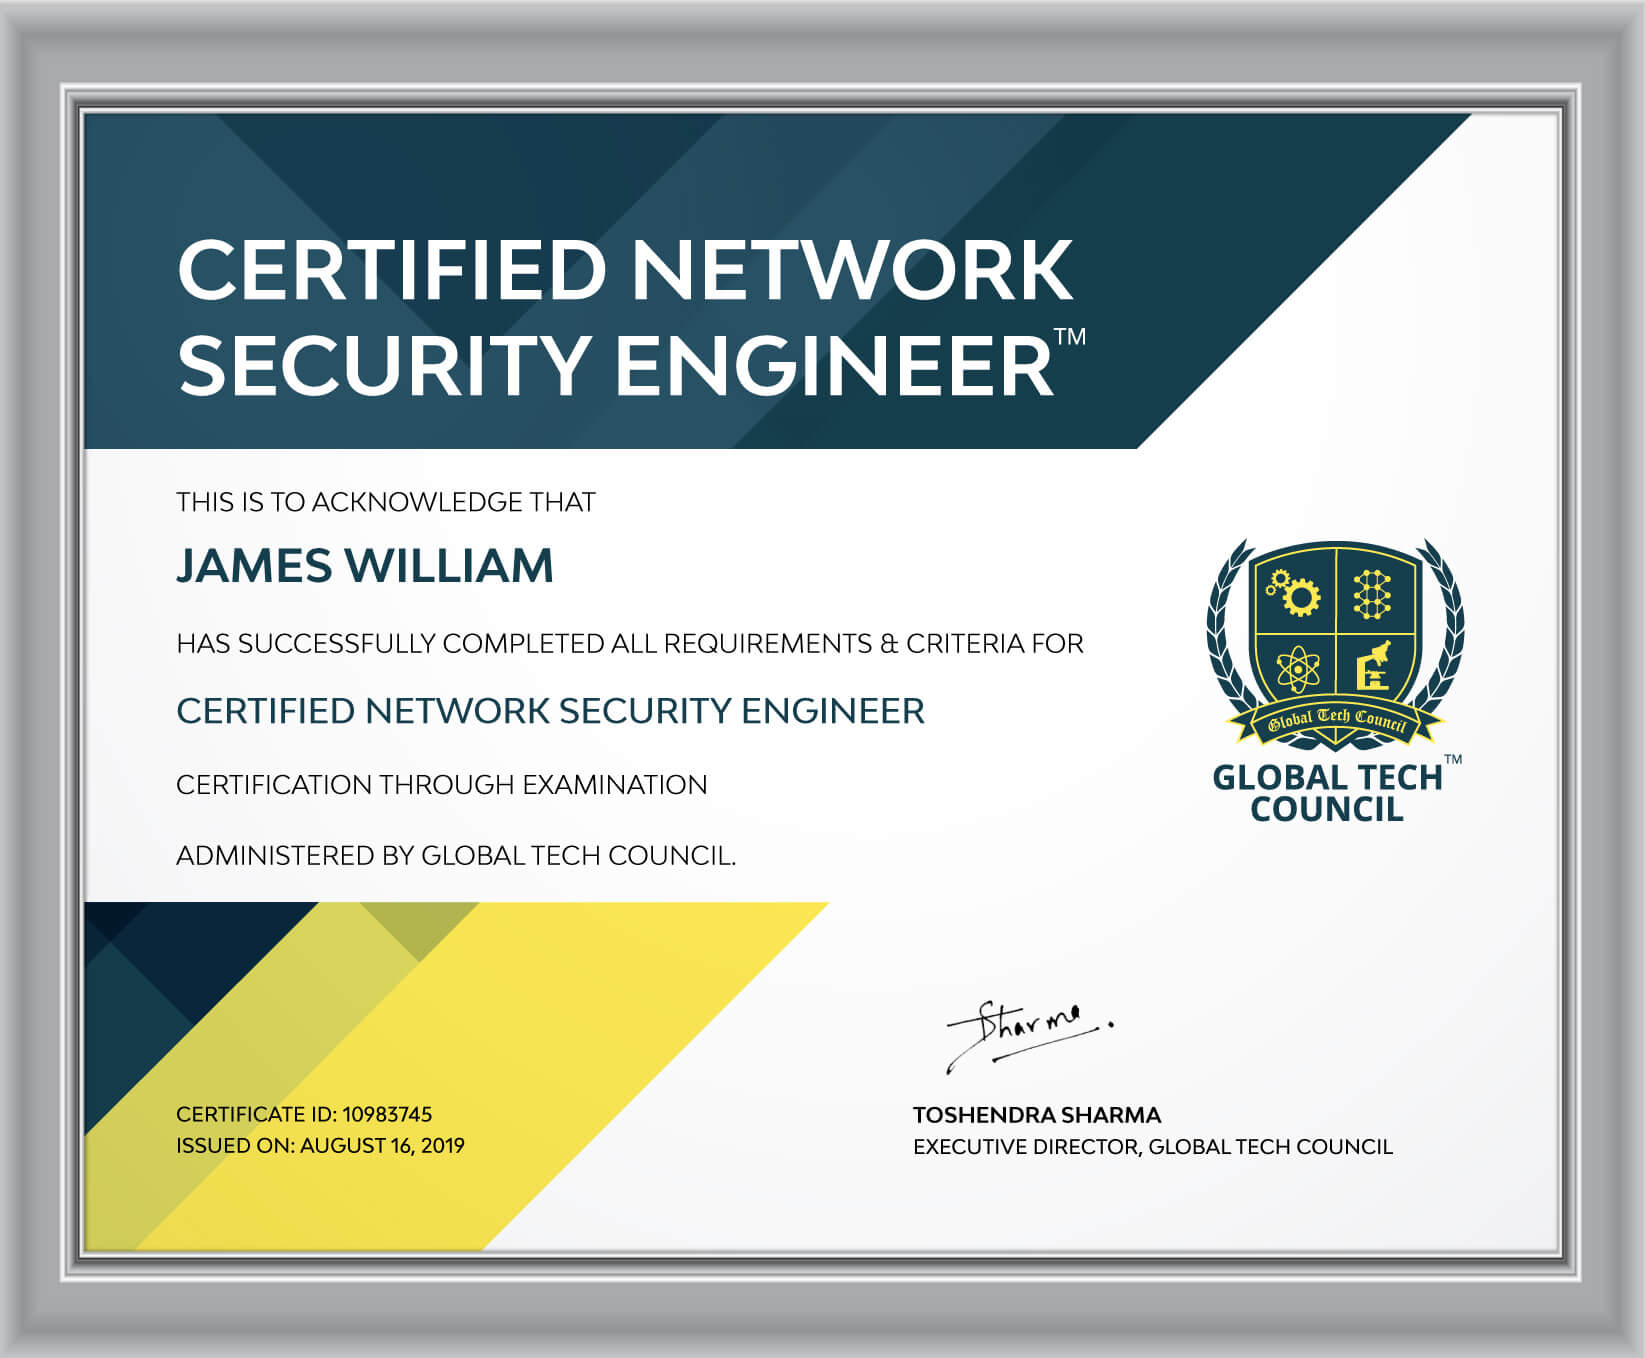  network security certifications, cyber security engineer certifications, network security engineer training